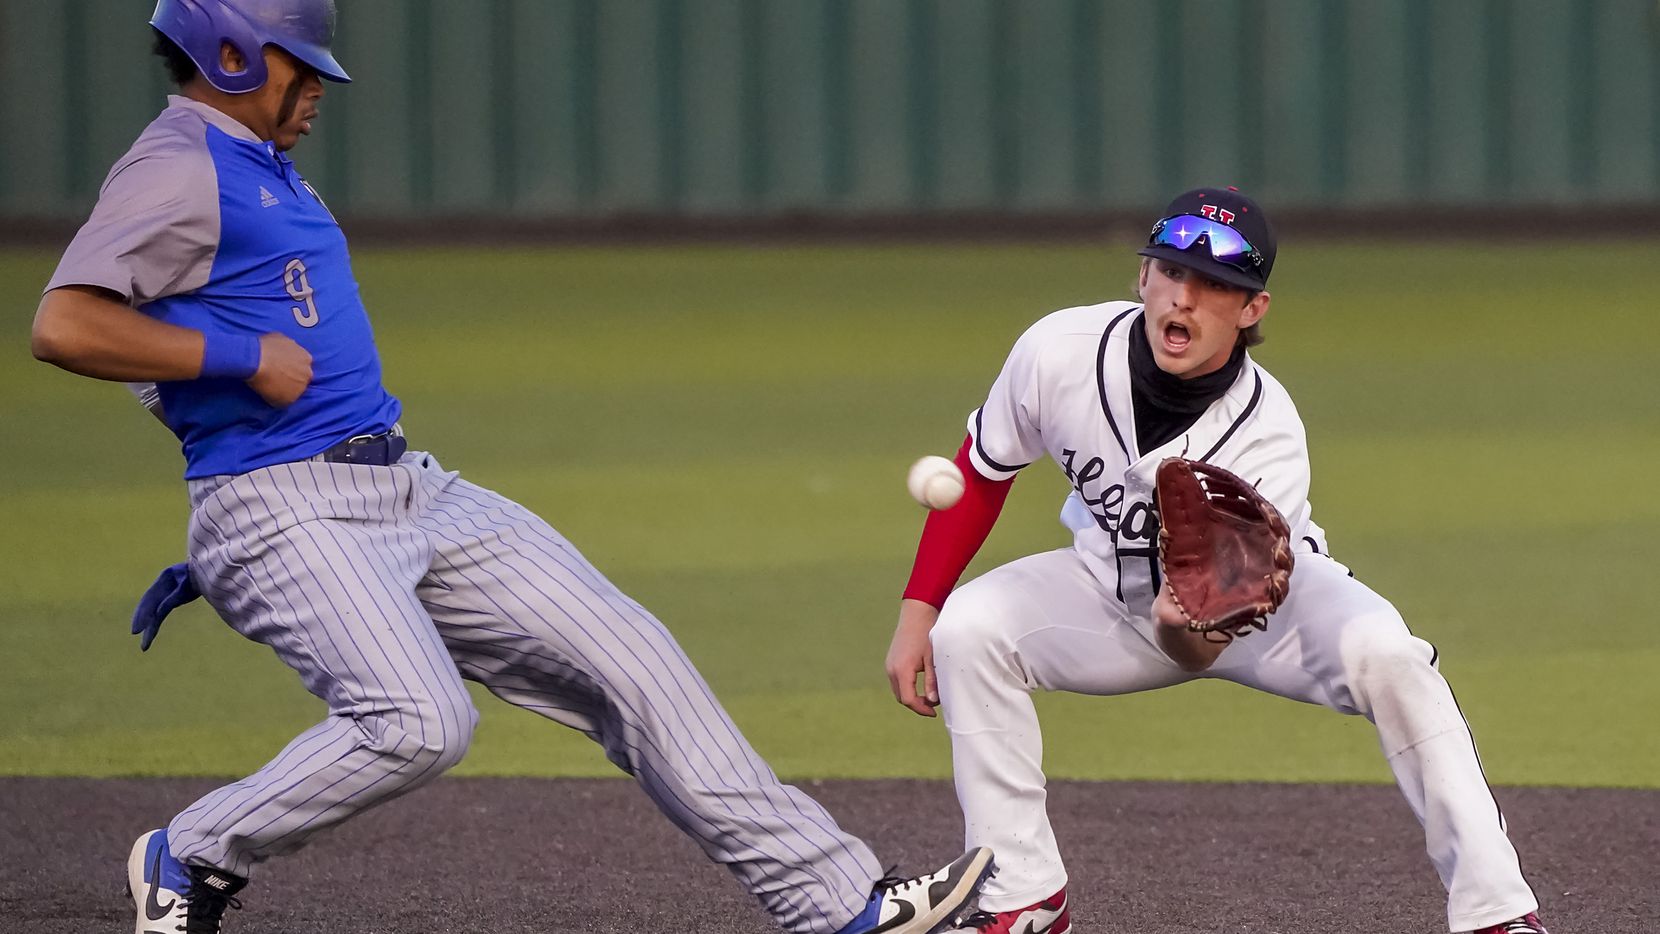 North Mesquite's Kai Howard gets back to second base ahead of the tag from Rockwall-Heath shortstop Karson Krowka during Rockwall-Heath's 12-1 victory Thursday.